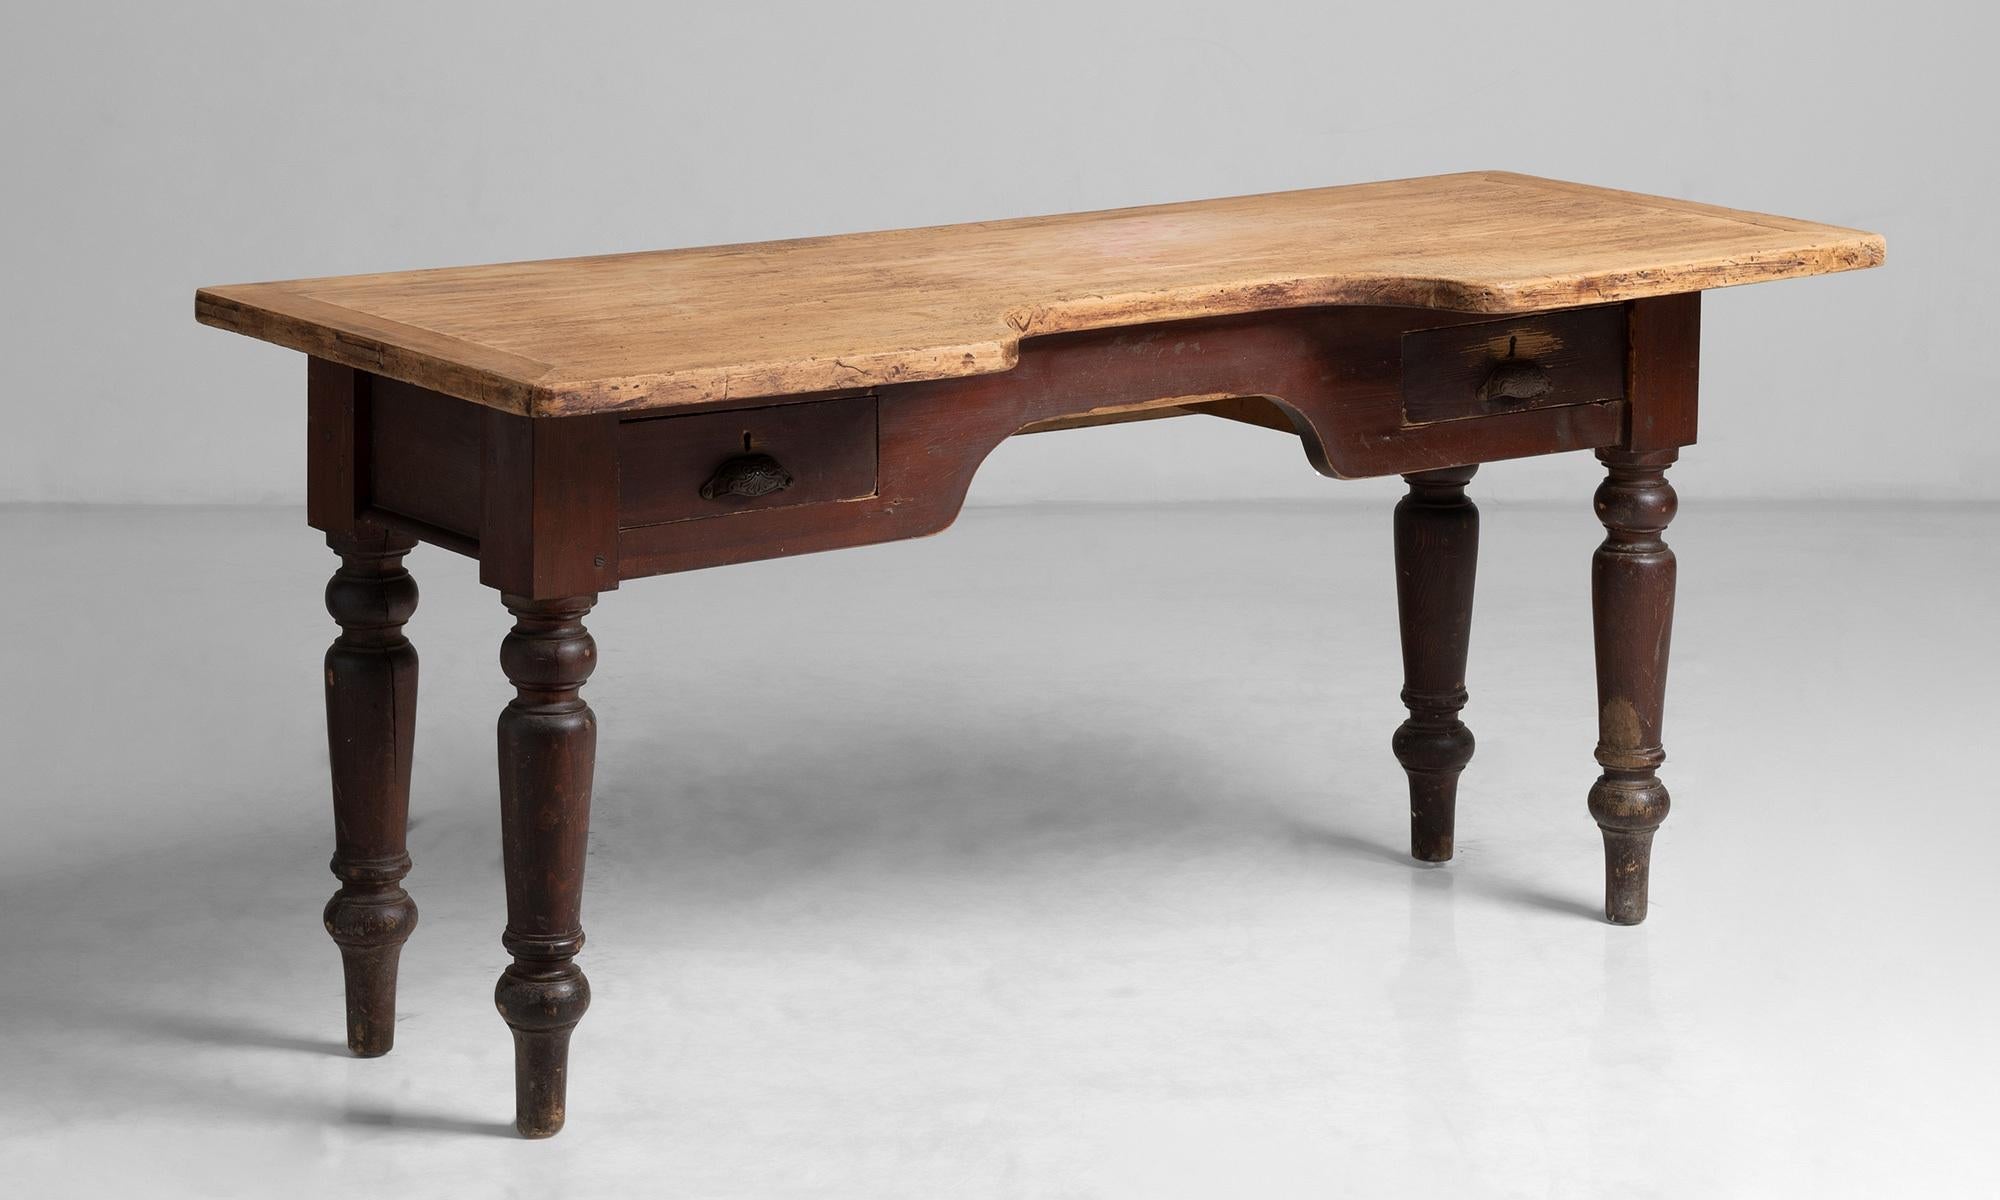 Jeweller's work table.

England, Circa 1870

Constructed in pine, with cut away to the front allowing the worker to get closer.

KMeasures: 66